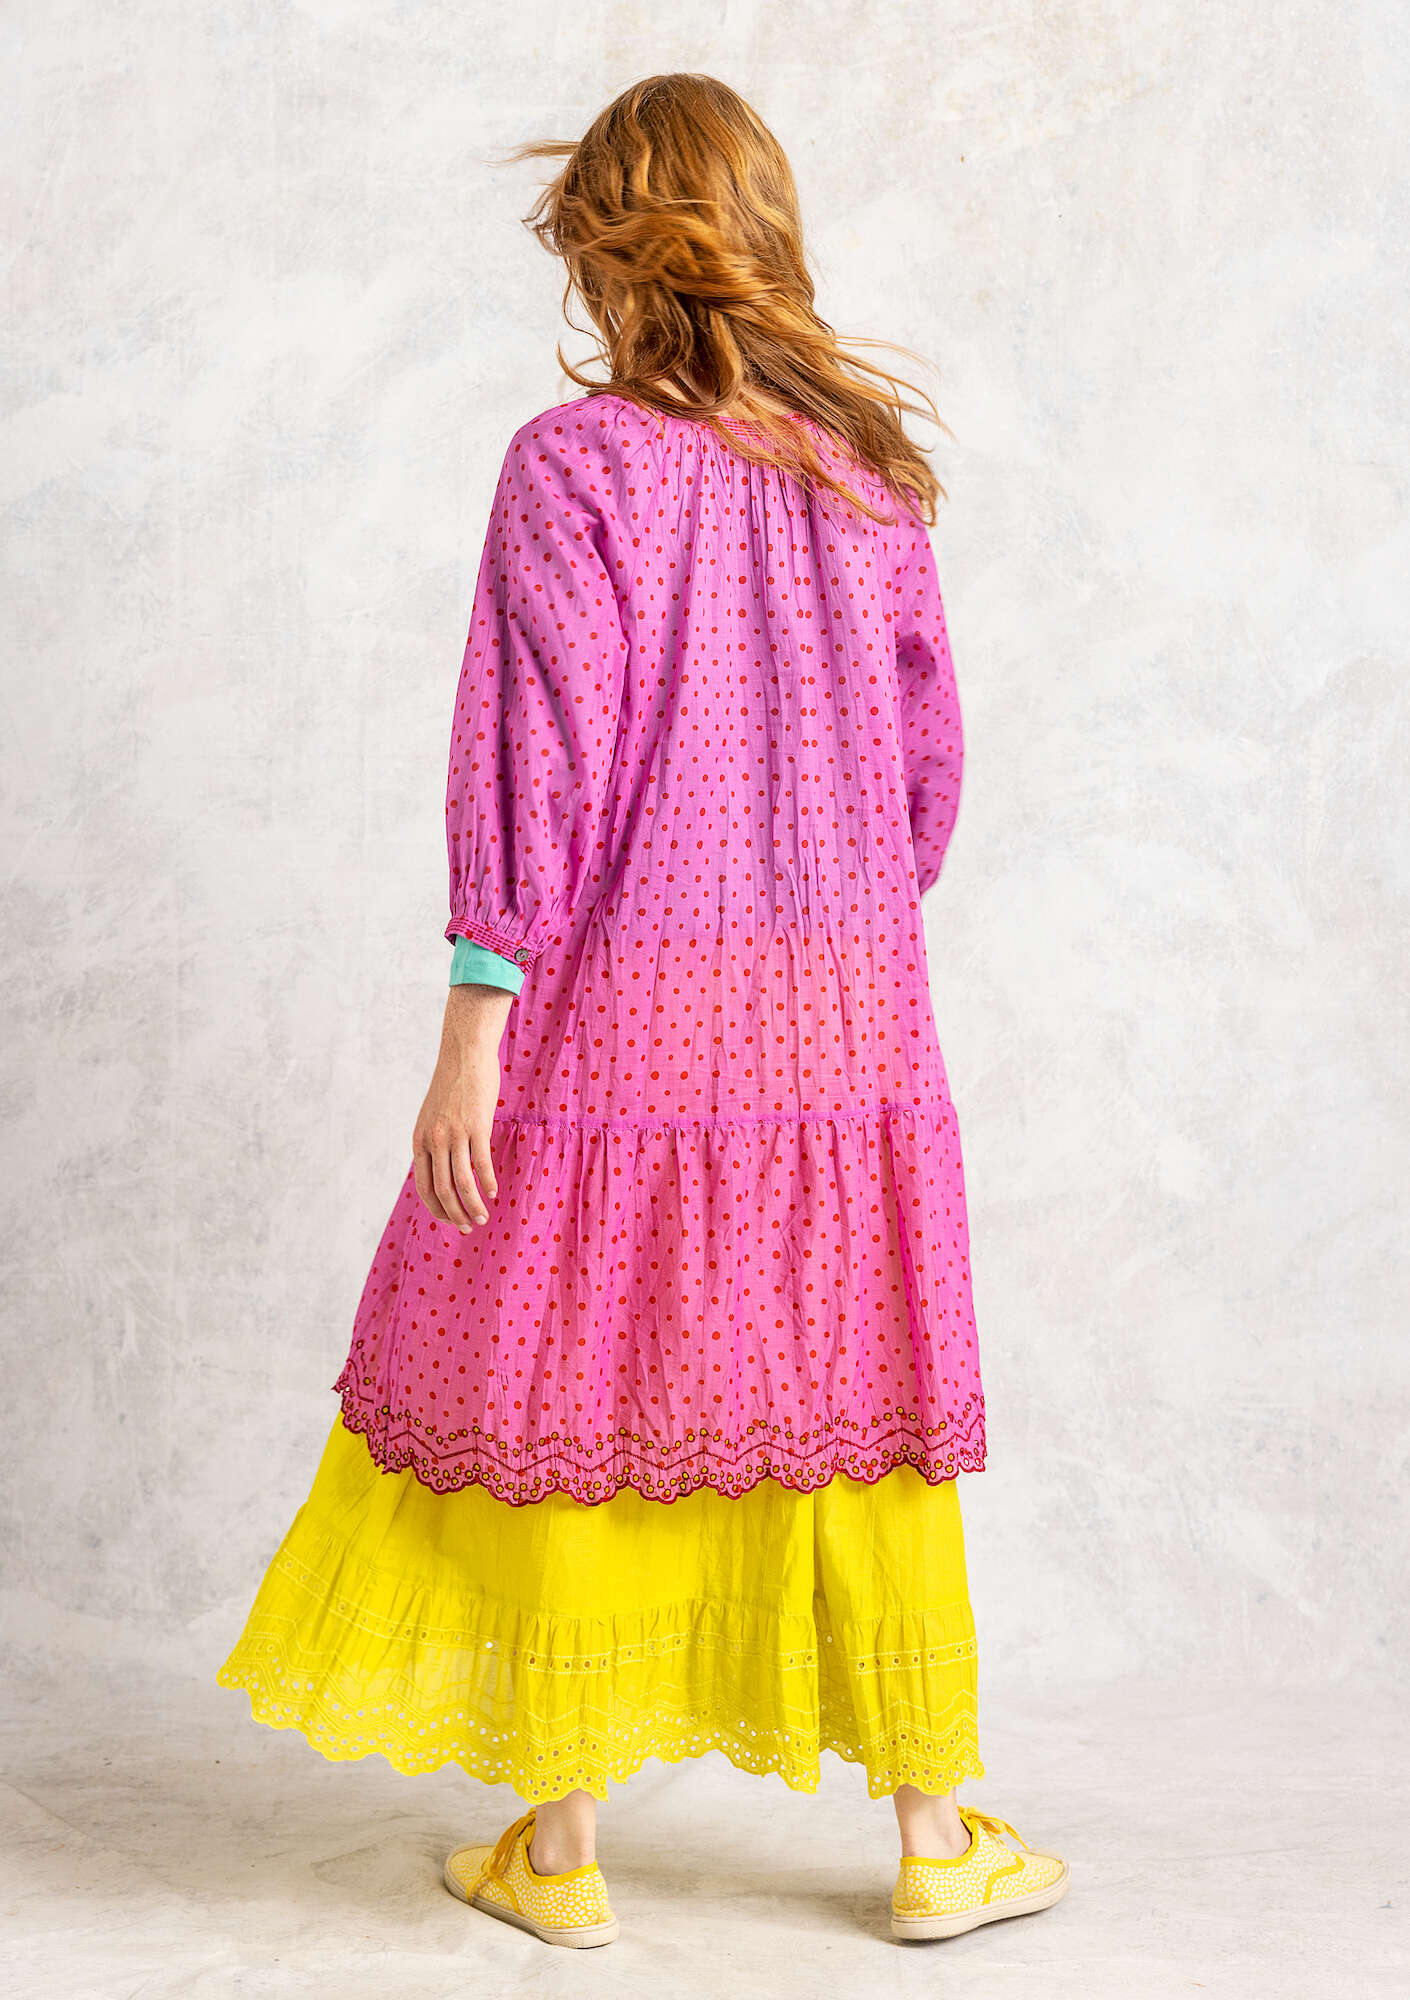 Woven “Lilly” dress in organic cotton wild rose thumbnail